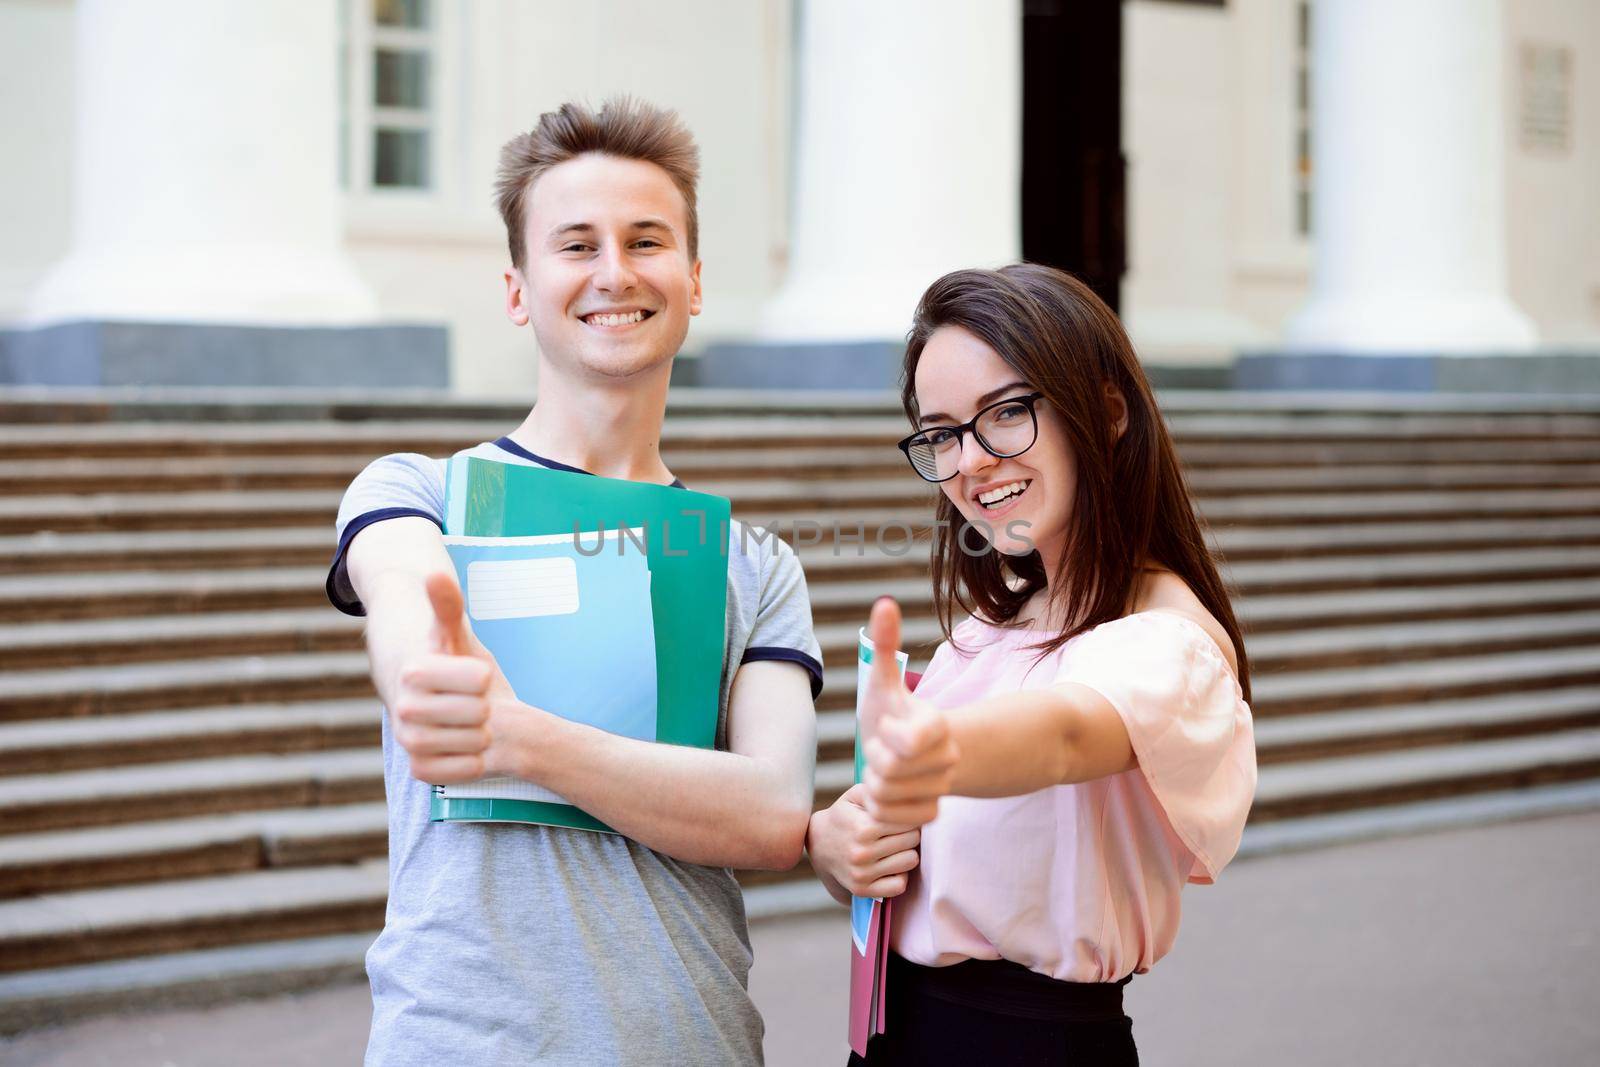 Happy students looking at camera showing thumbs up outside an university campus